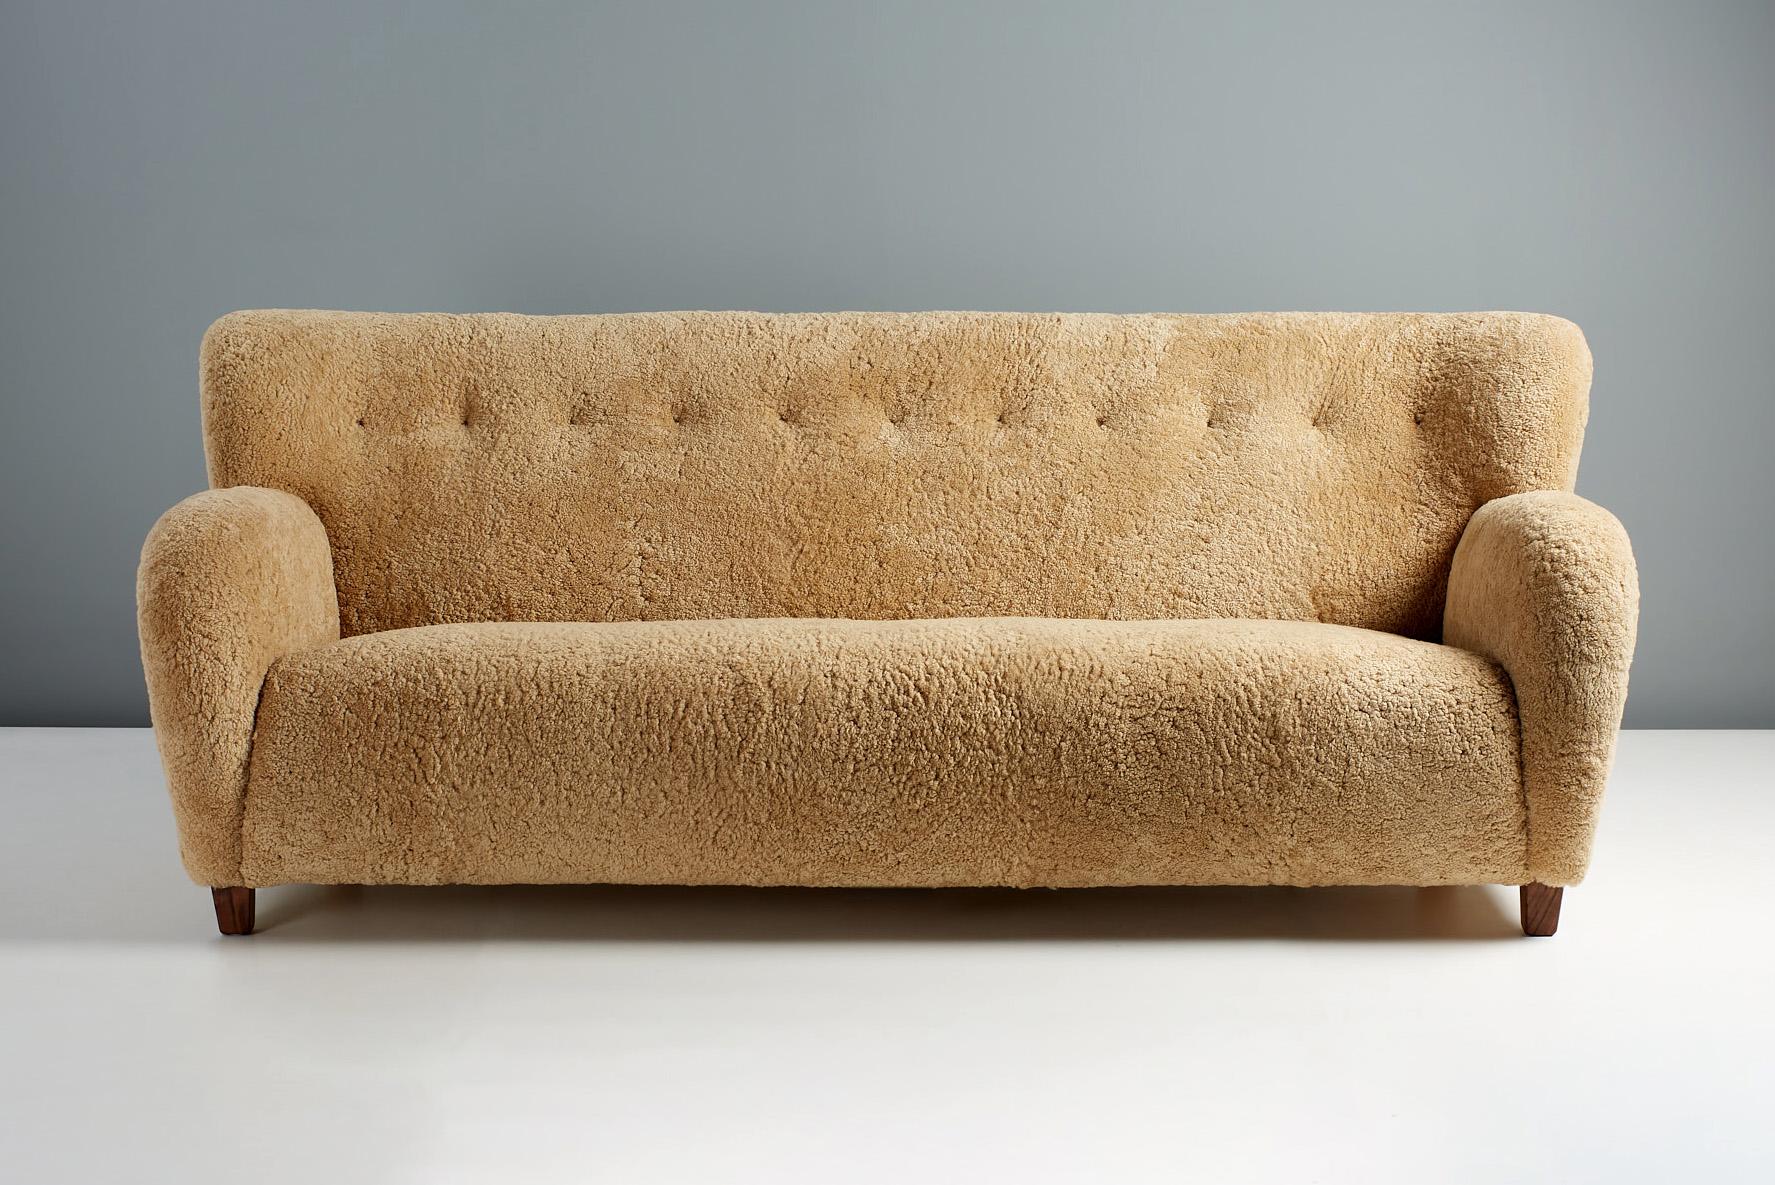 Dagmar Karu sofa

The Karu sofa has been developed and handmade at our workshops in London. The sofa legs are available in oiled oak, dark fumed oak, oiled walnut (as shown) or dark stained beech. The frame is made entirely of solid English beech